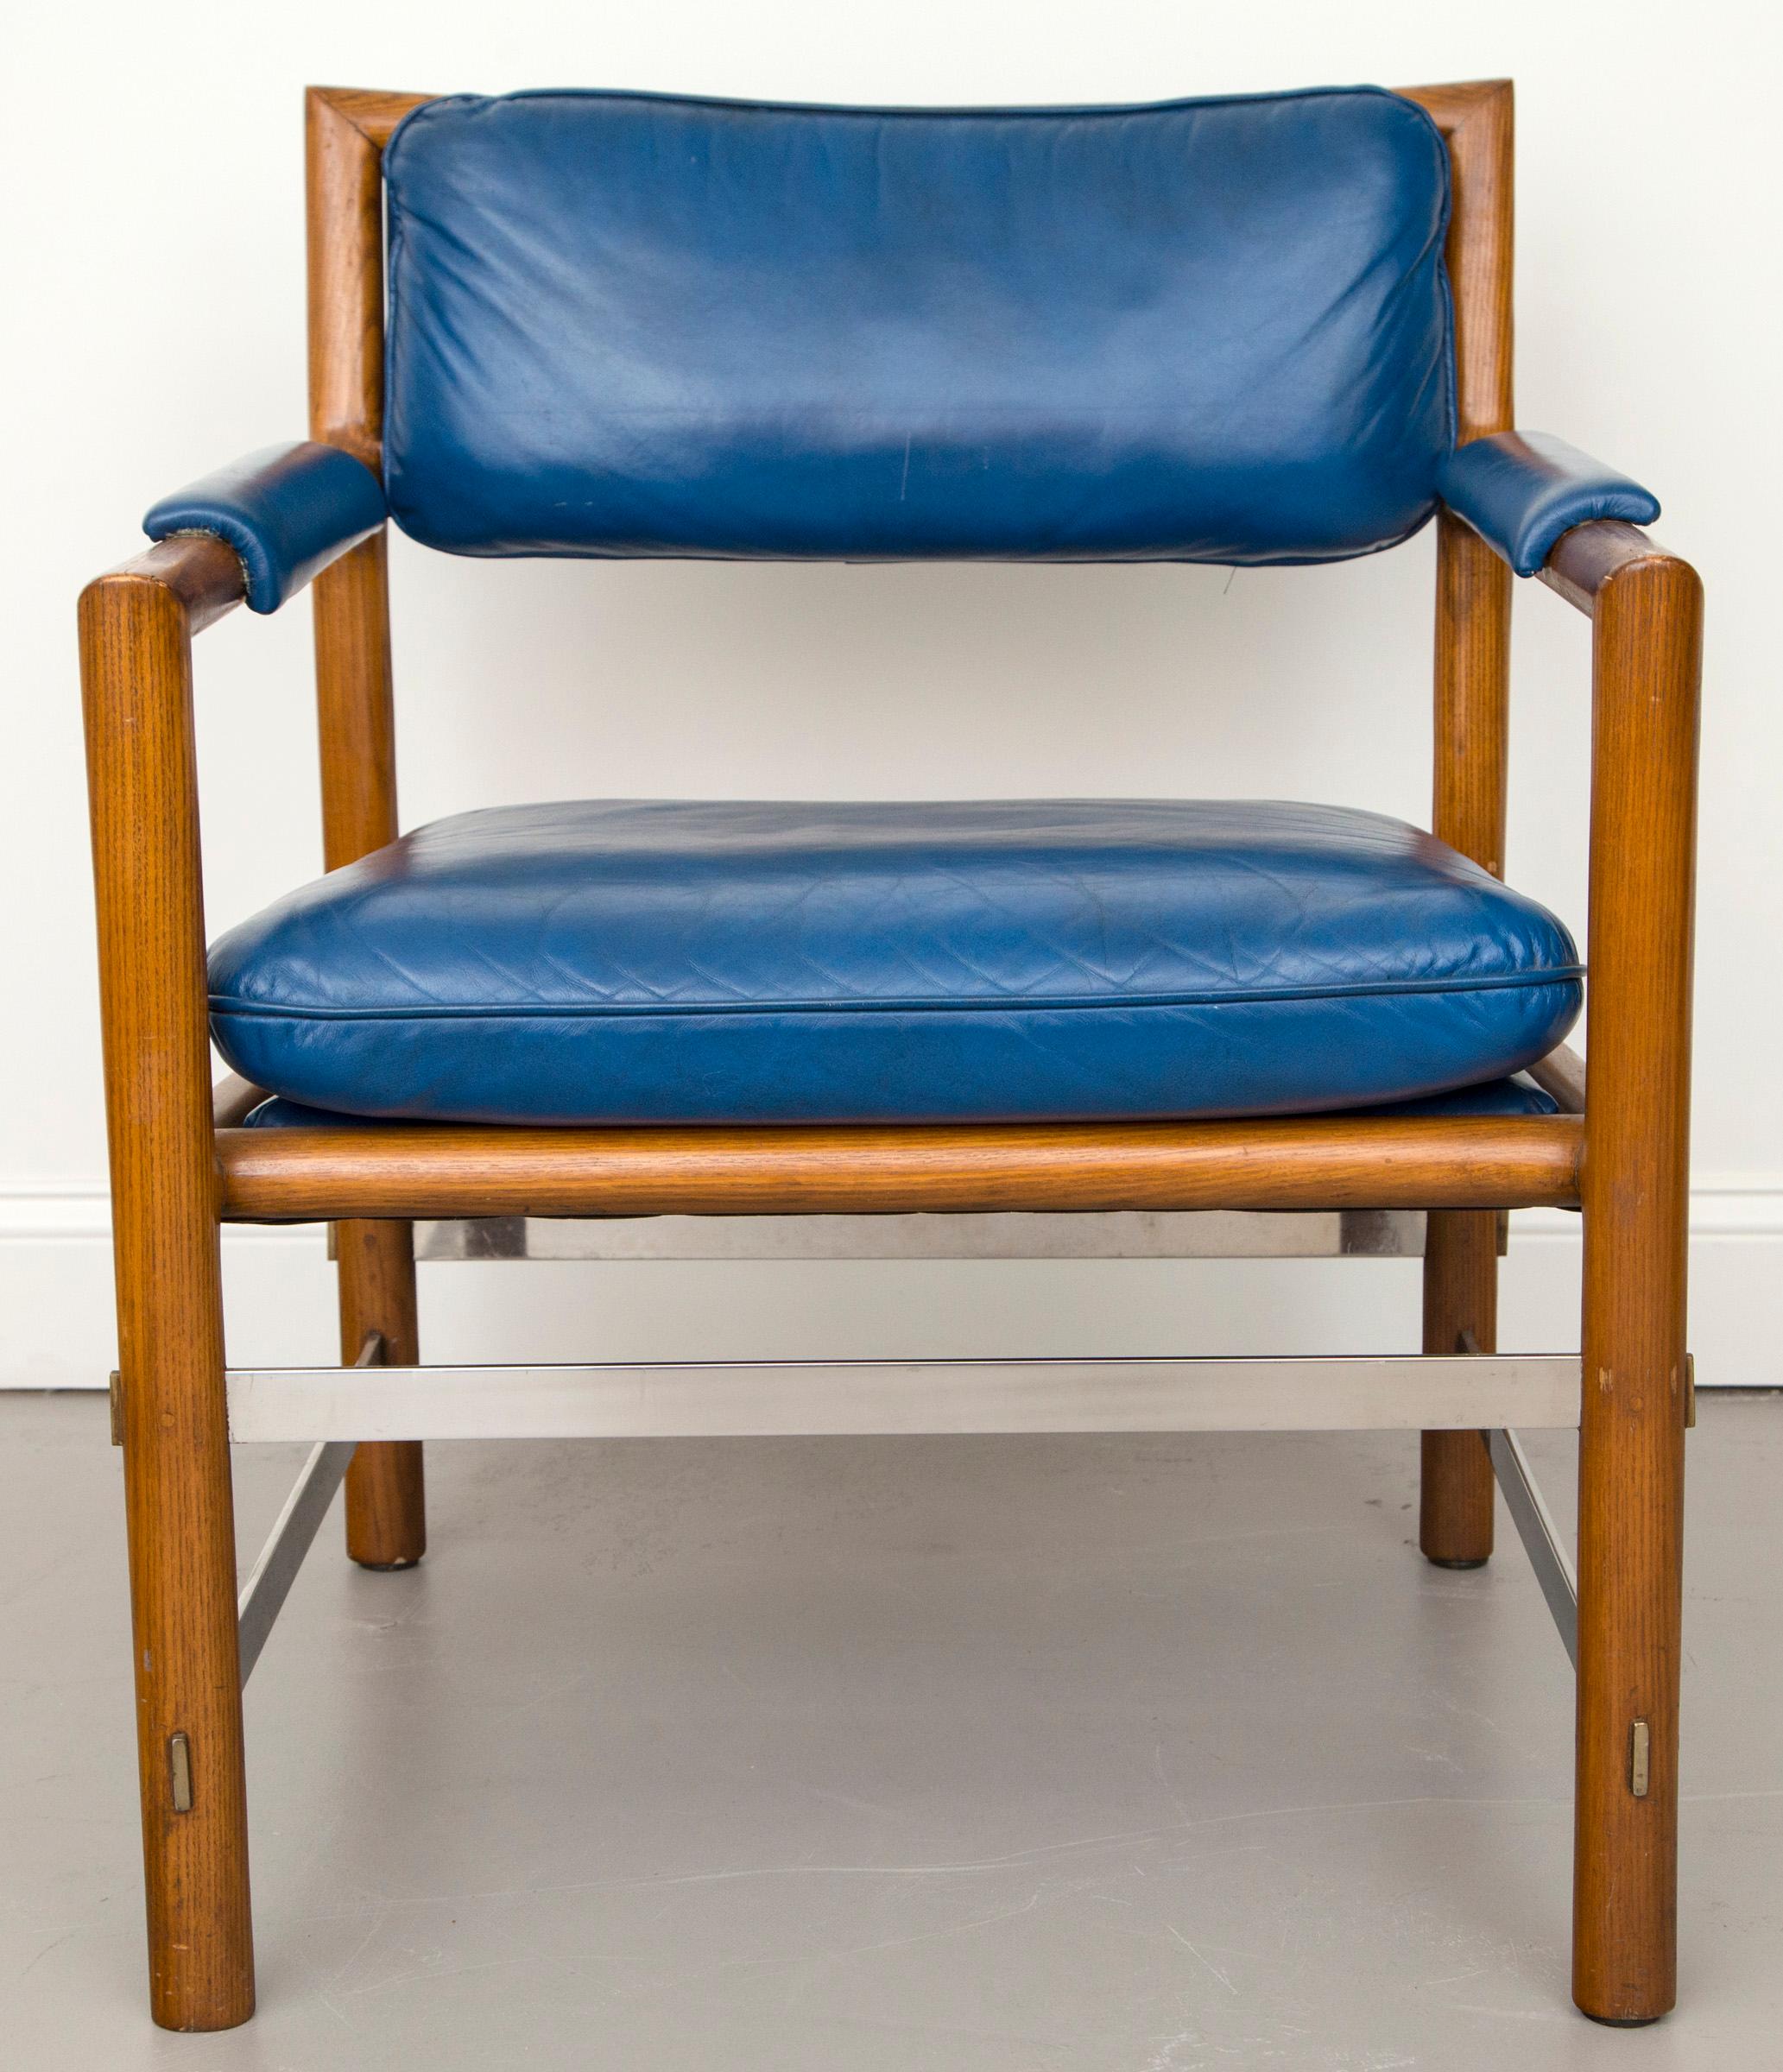 4 blue leather, wood and stainless steel Ed Wormley for Dunbar chairs.